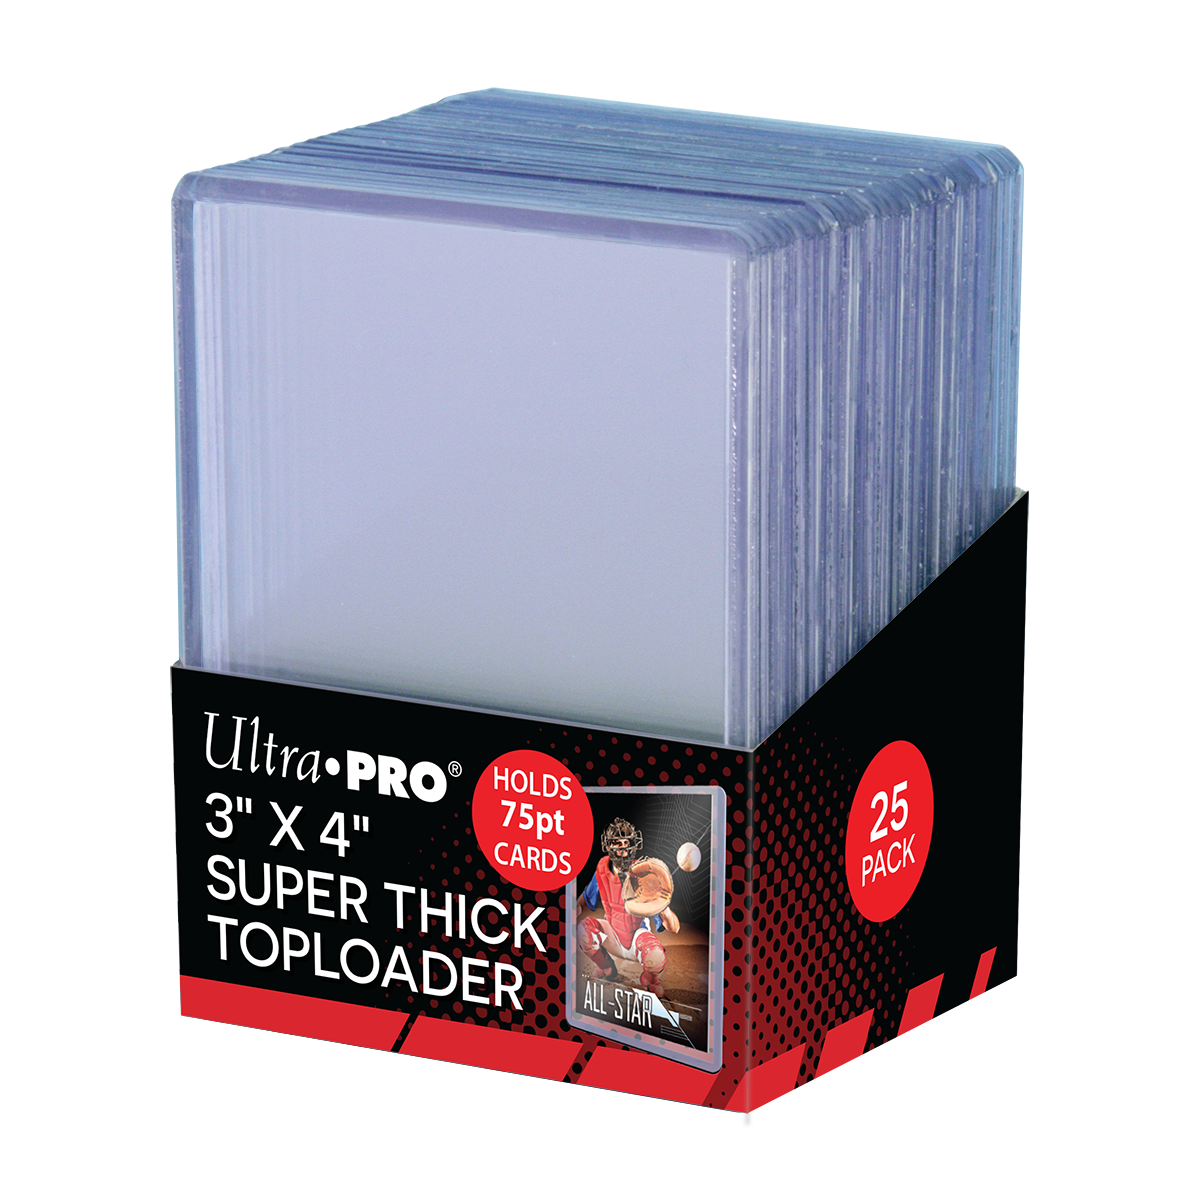 protection Ultra Pro Card Supplies 100 Graded Standard Card